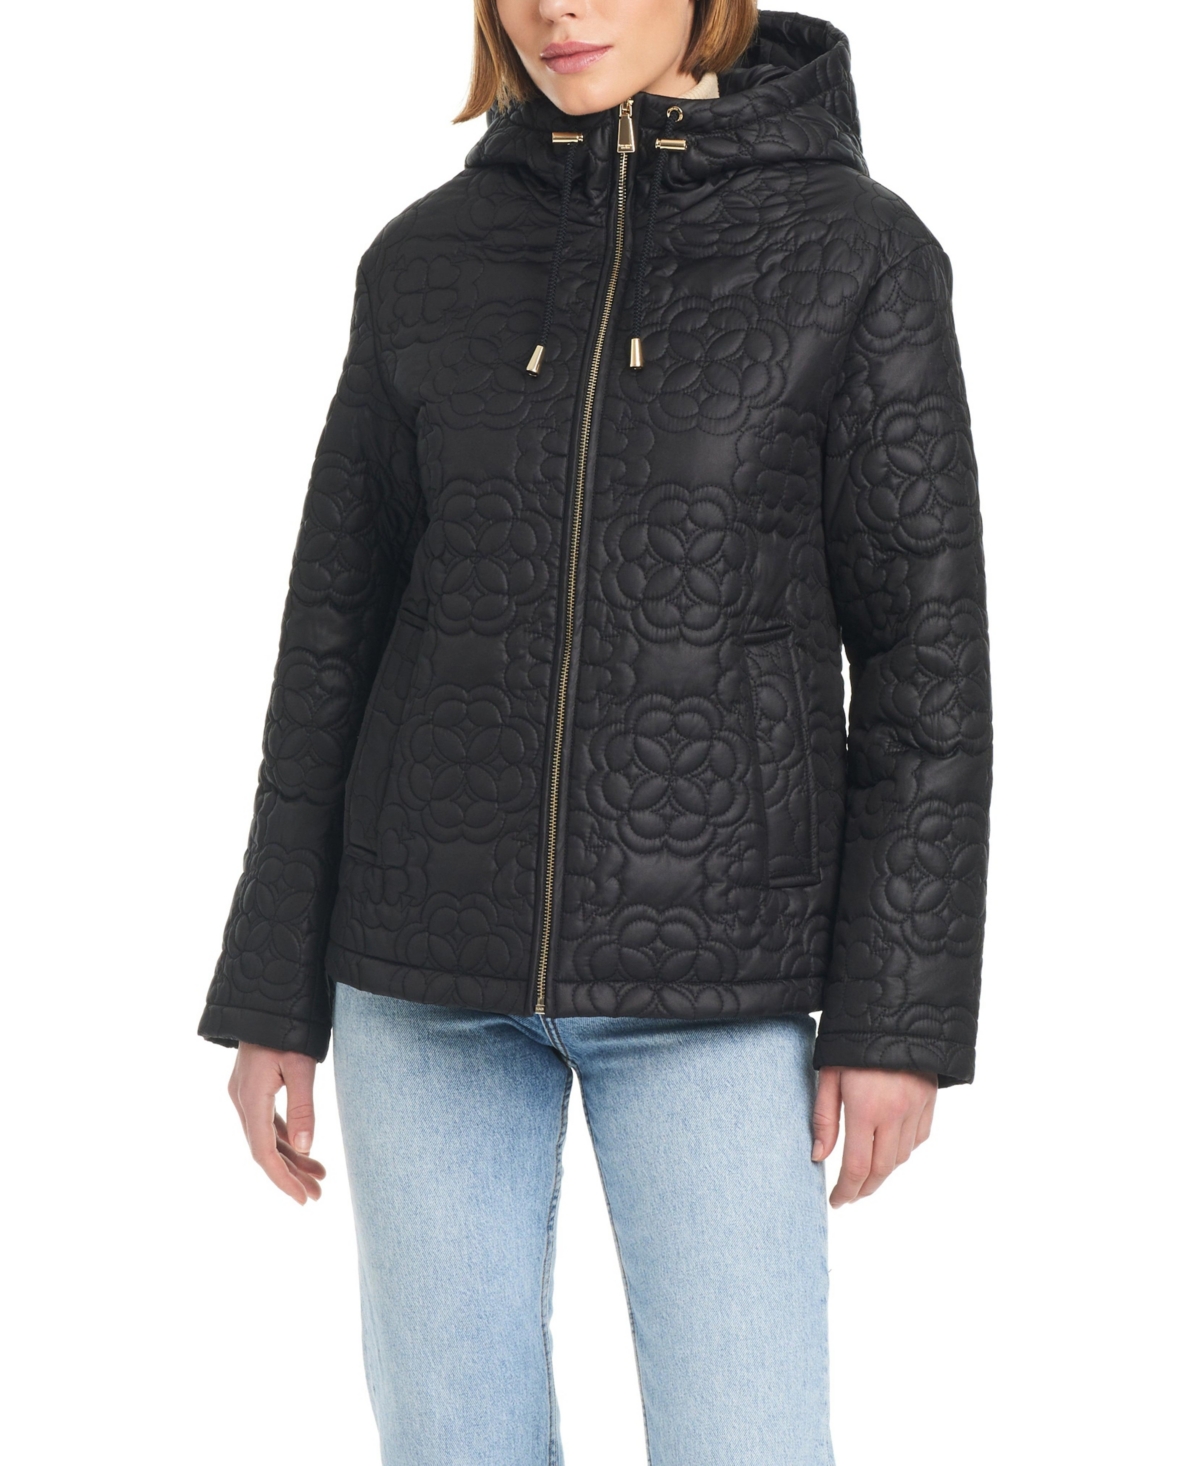 Women's Signature Zip-Front Water-Resistant Quilted Jacket - Spring olive